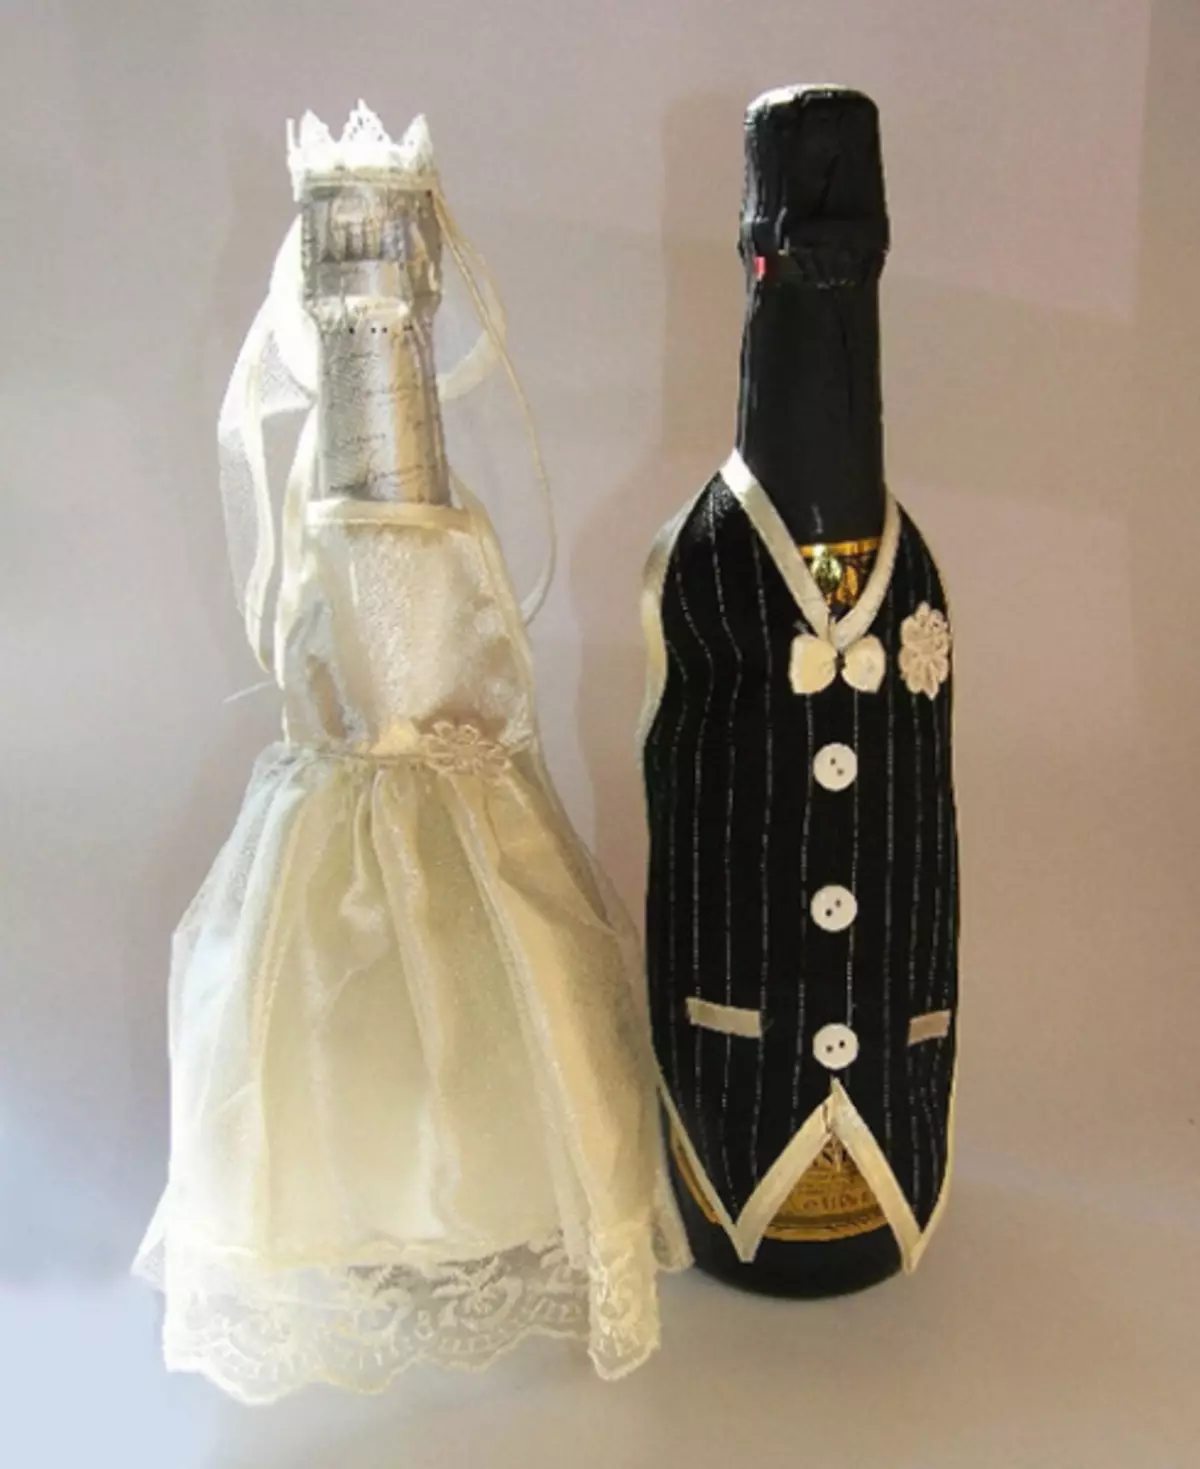 Bottle decor with their own hands: photo and video on decorating